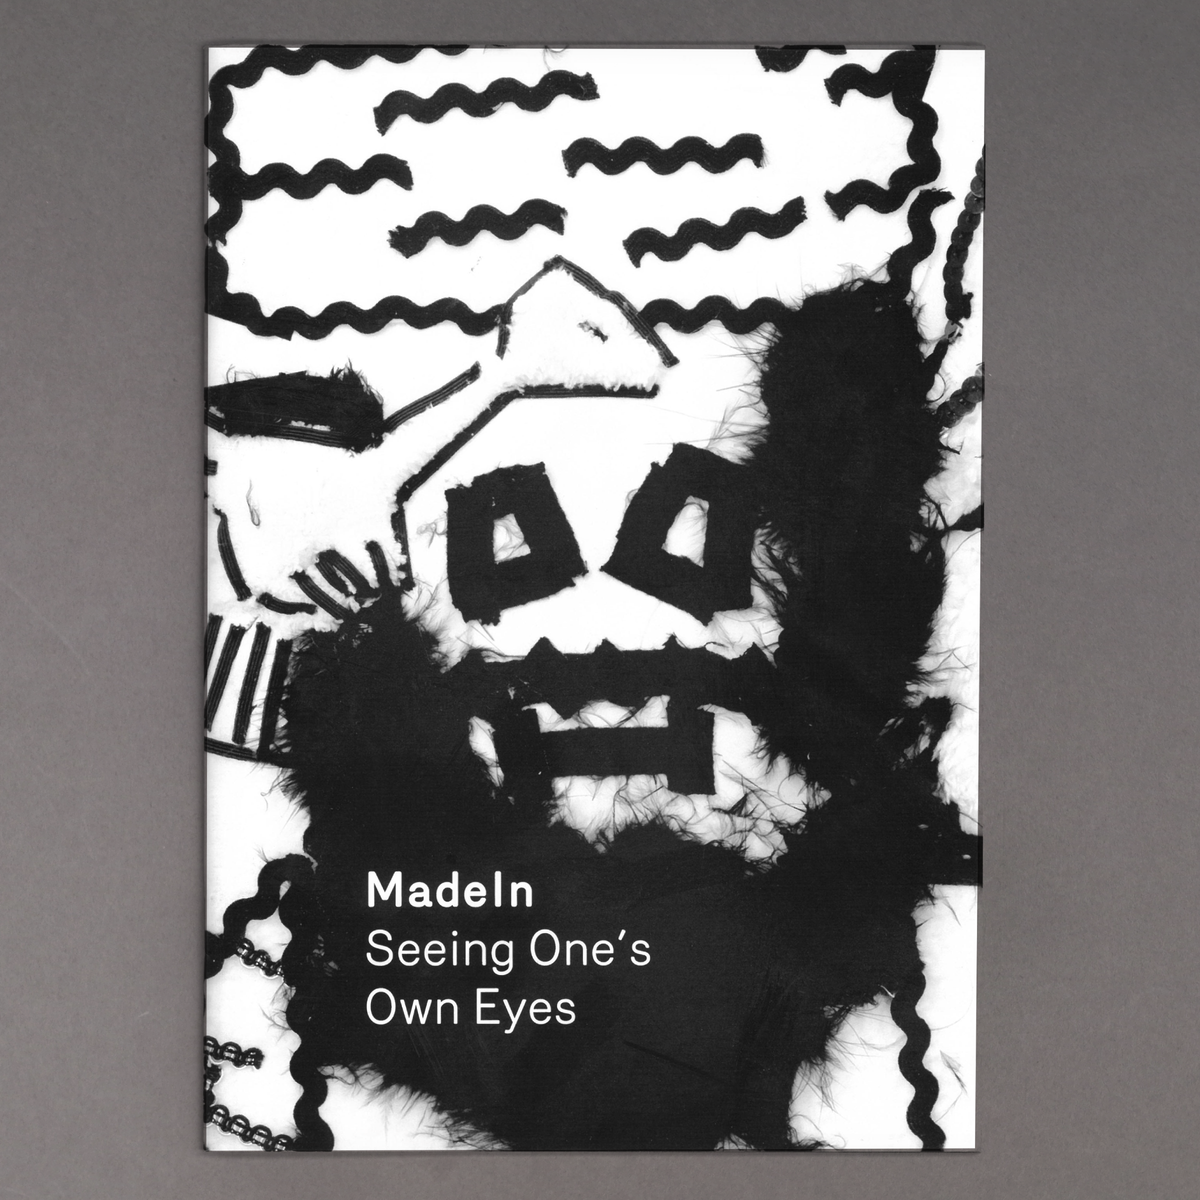 MadeIn: Seeing One's Own Eyes